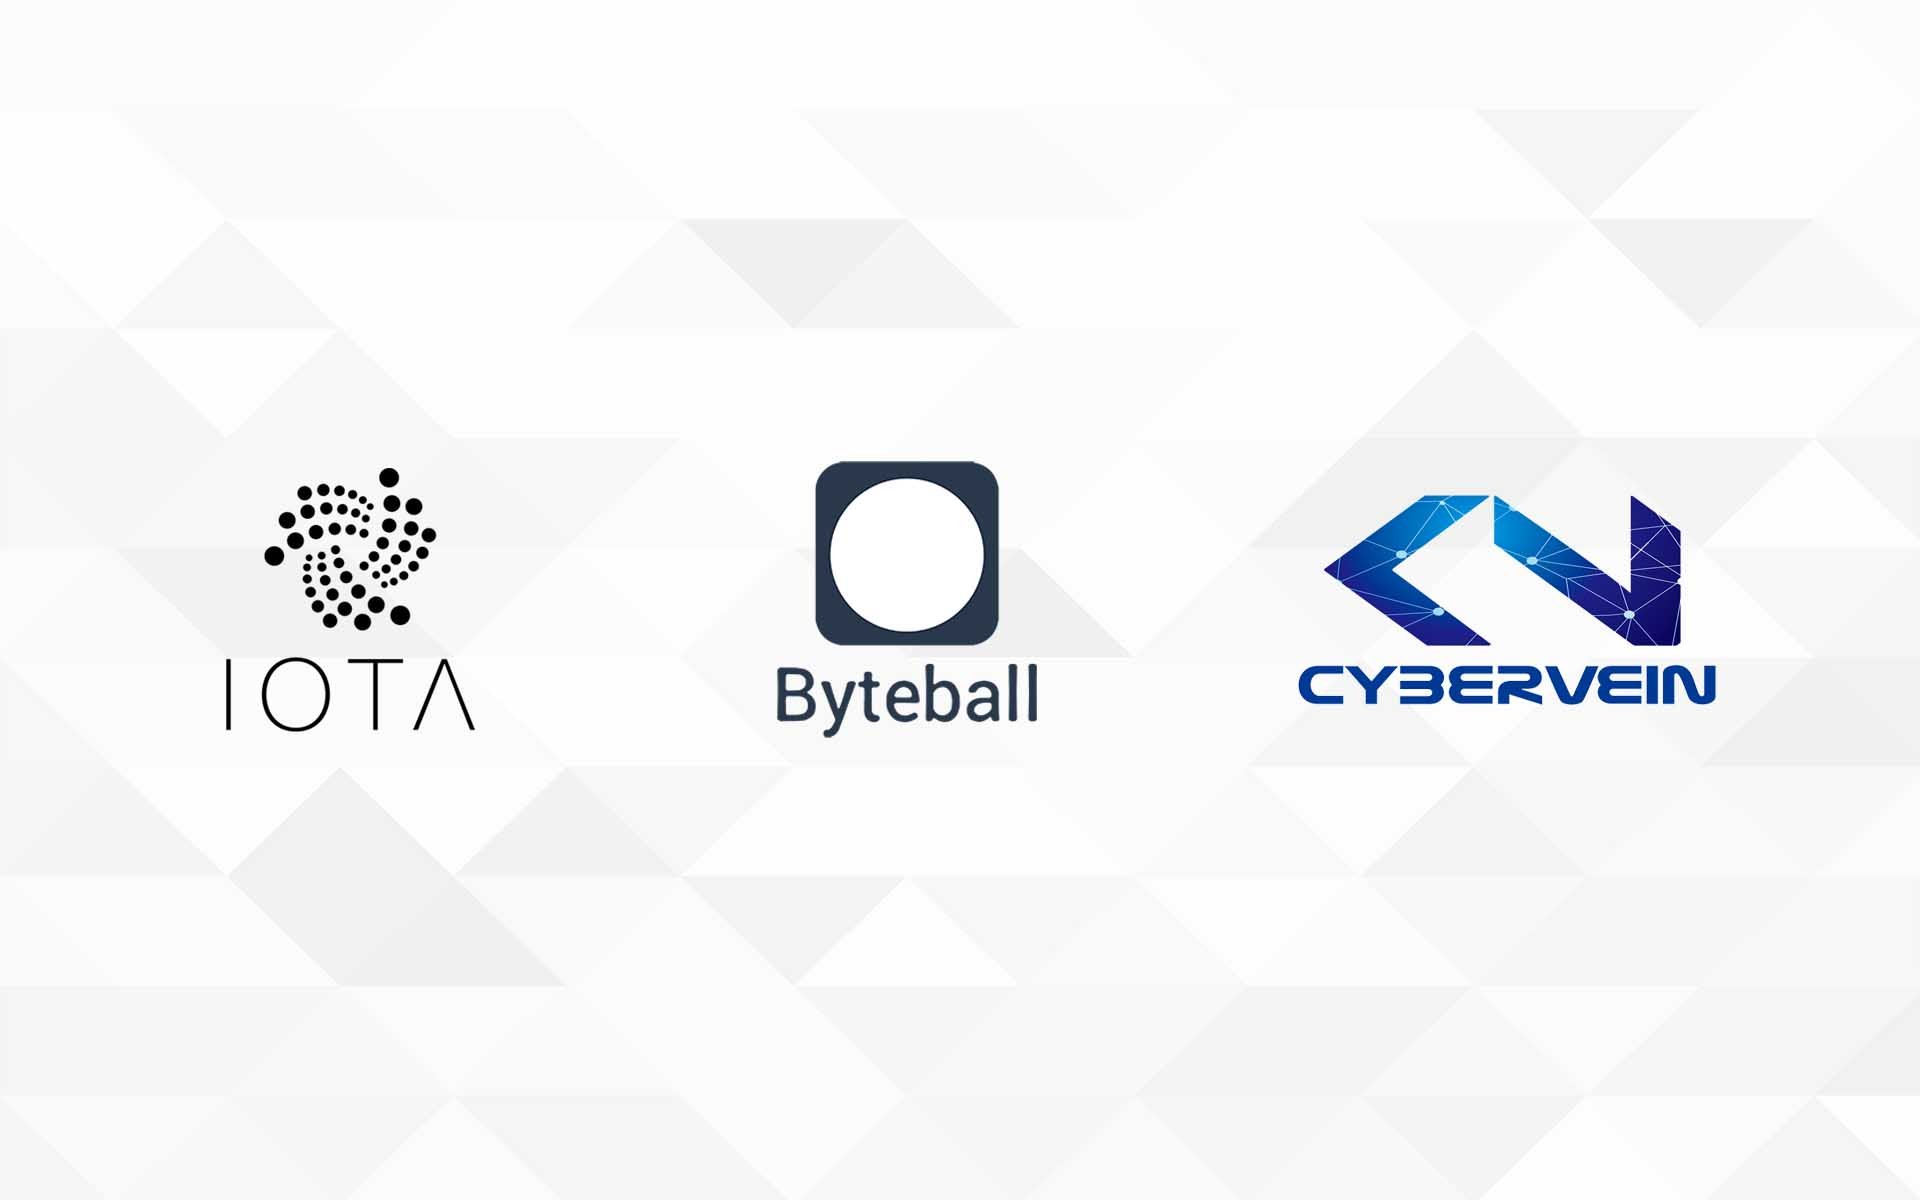 CyberVein Competing Against IOTA and Byteball? It’s Not Just That